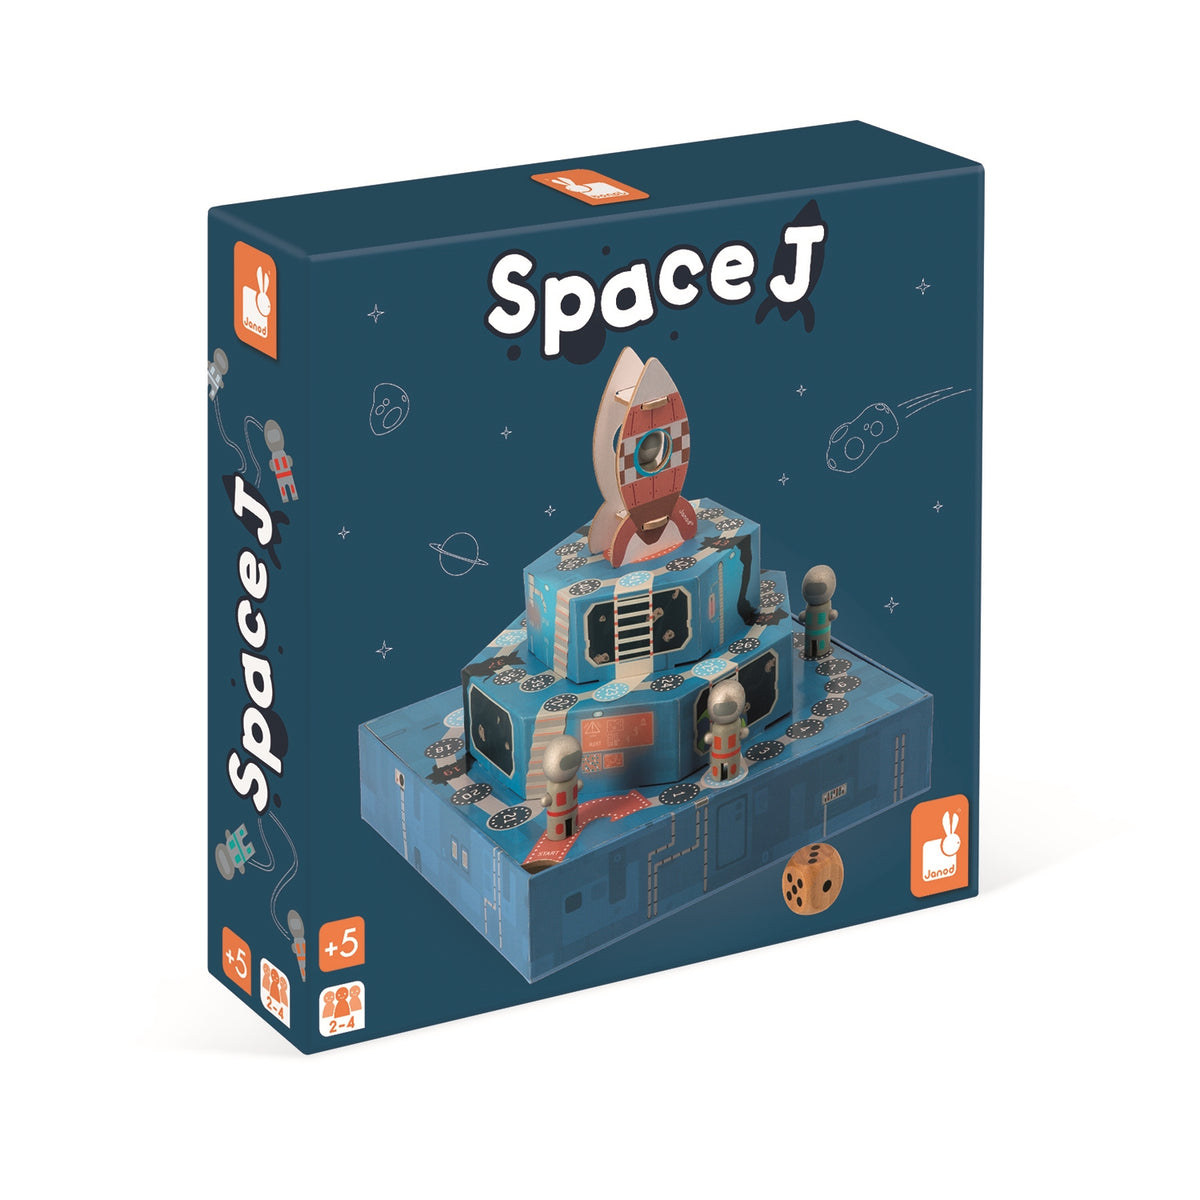 Space J Game by Janod